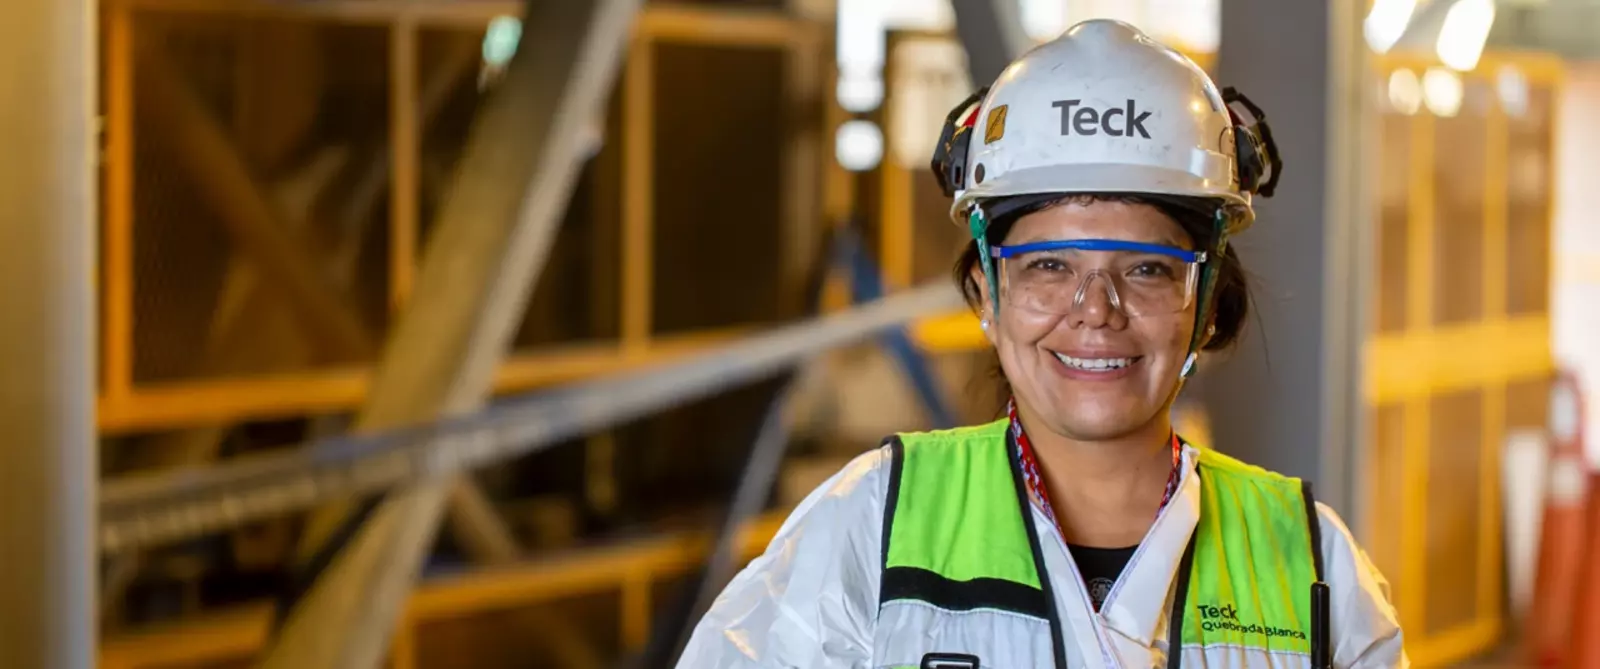 Smiling worker in safety gear and helmet with 'Teck' logo in an industrial setting.